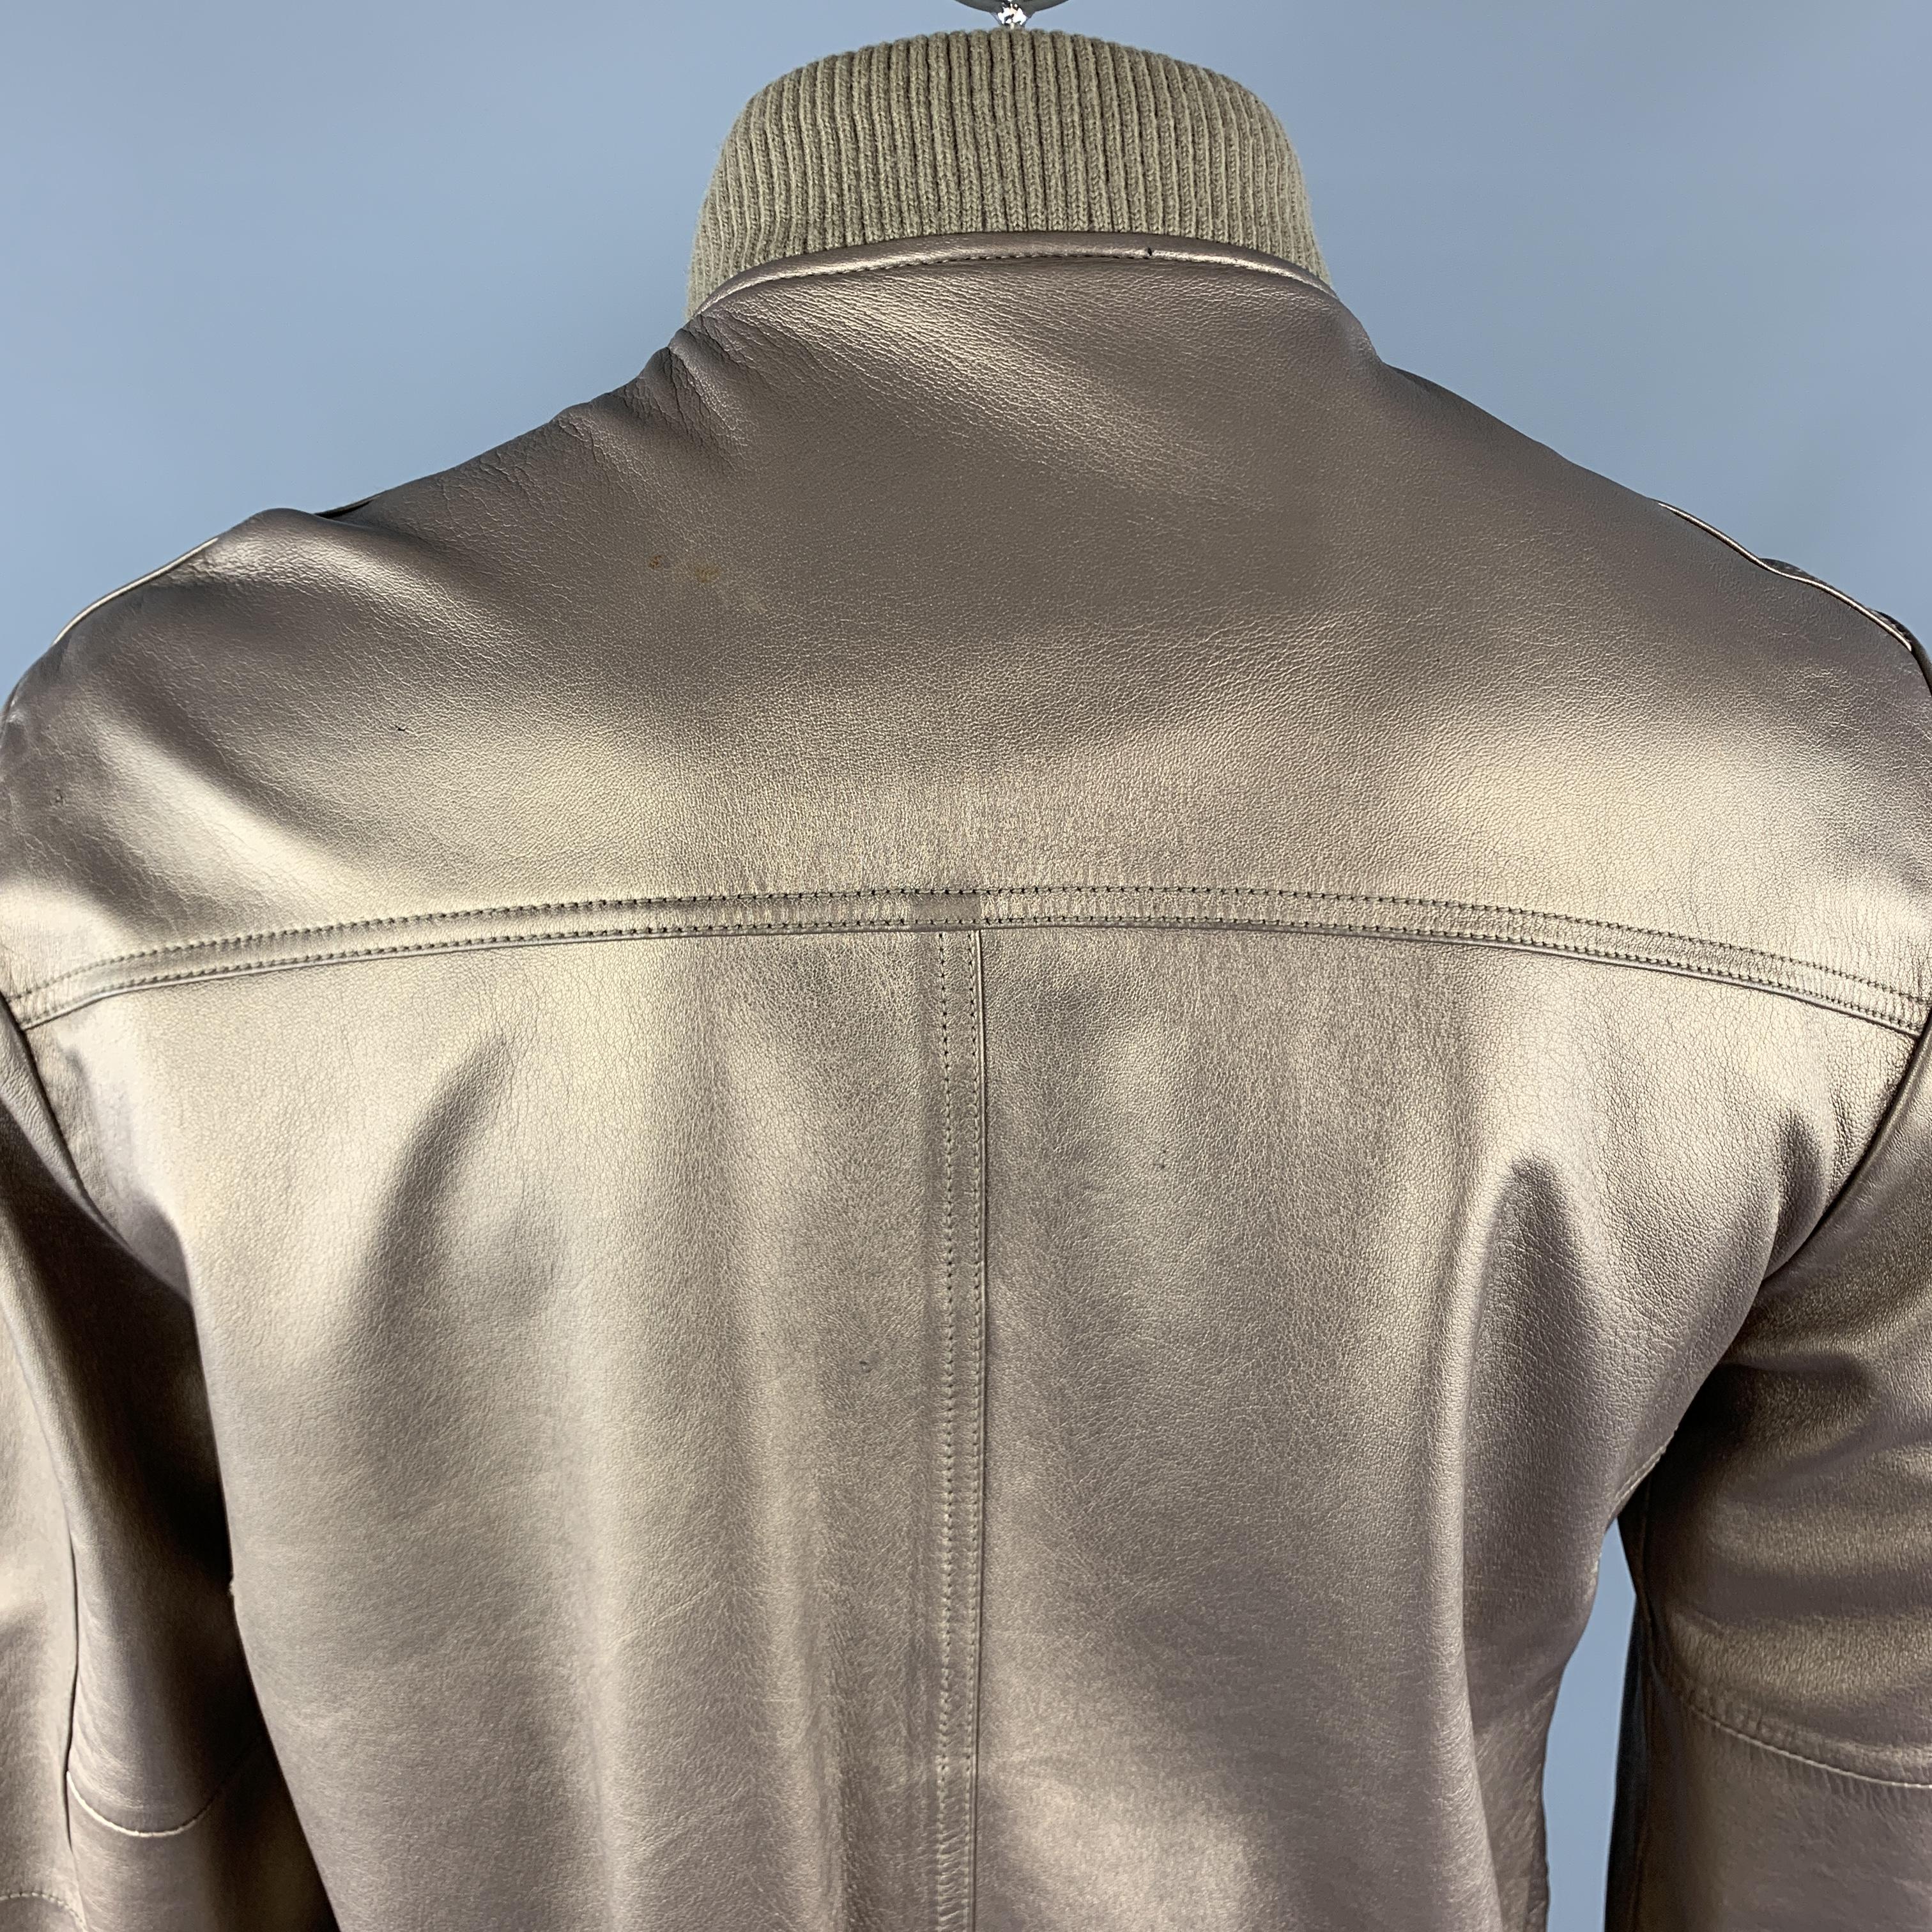 Brown KENNETH COLE 42 Gold Metallic Leather Zip Up Vintage Bomber Style Jacket